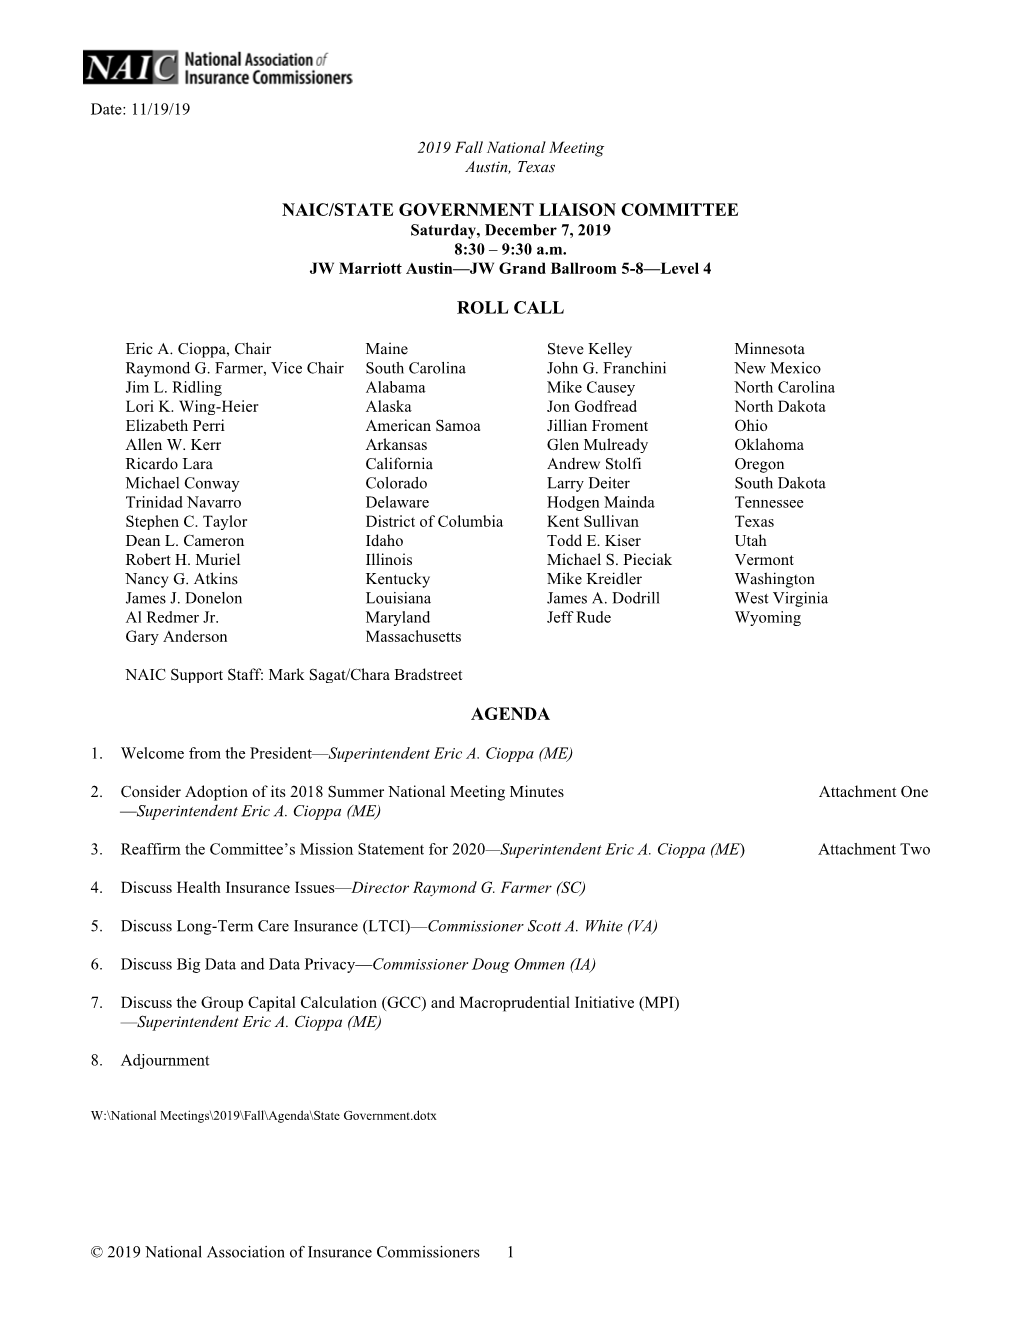 Naic/State Government Liaison Committee Roll Call Agenda